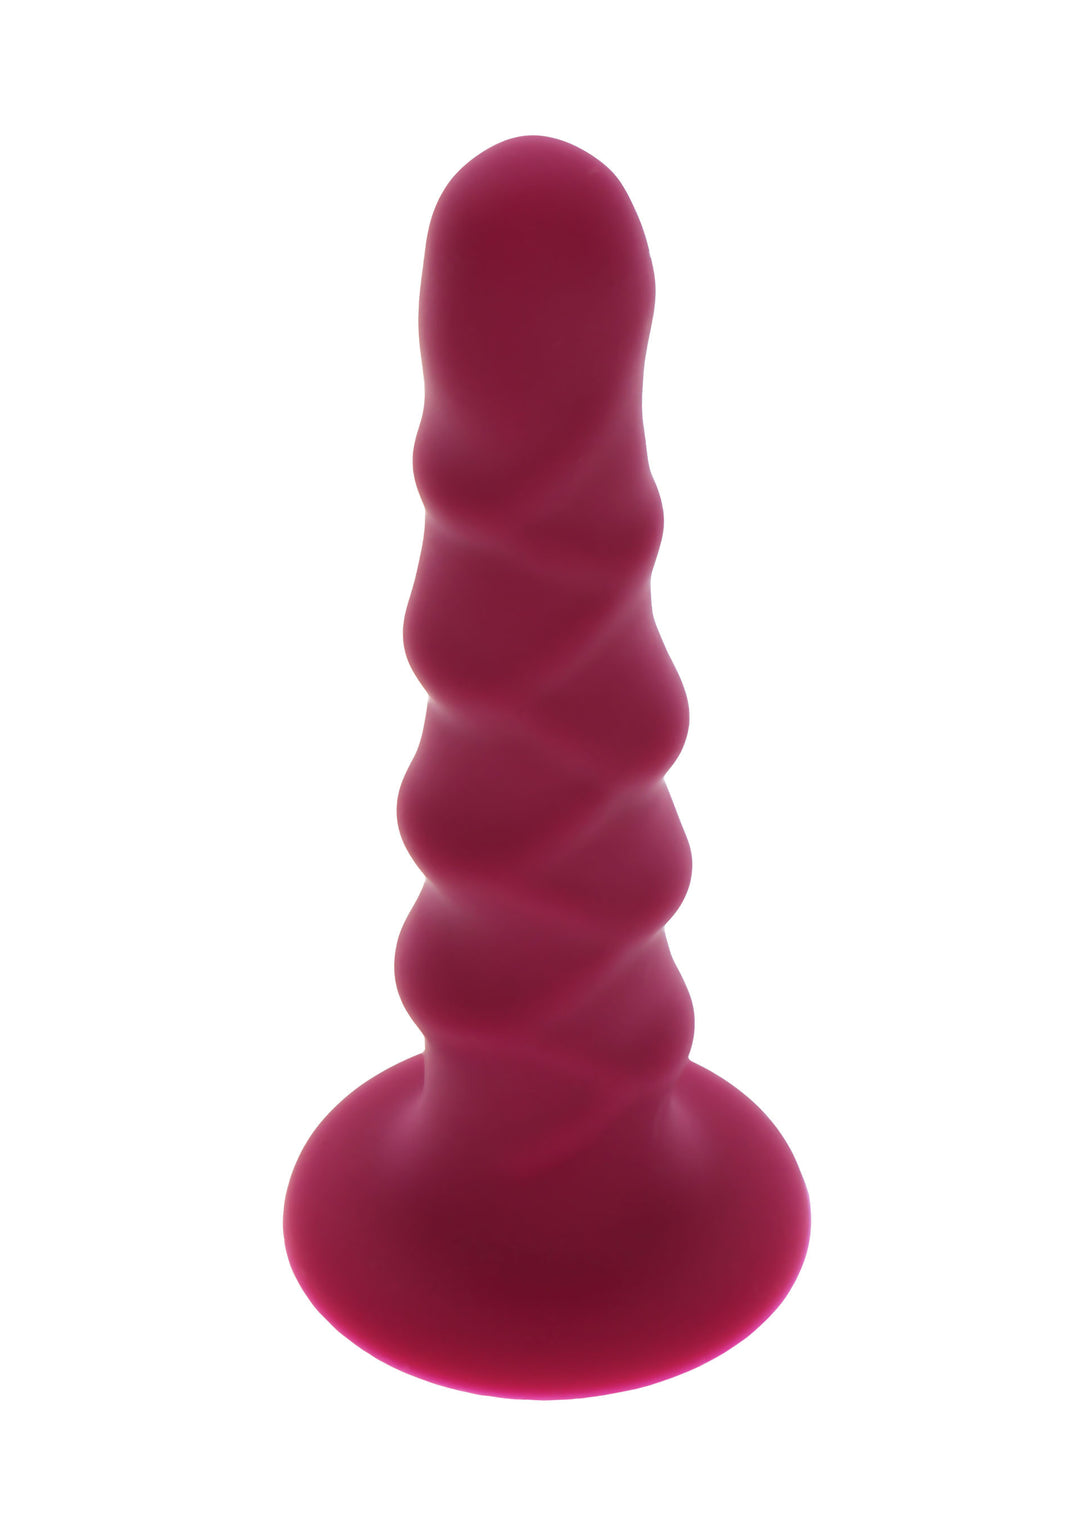 Dildo Ribbed Get Real Red - 16cm